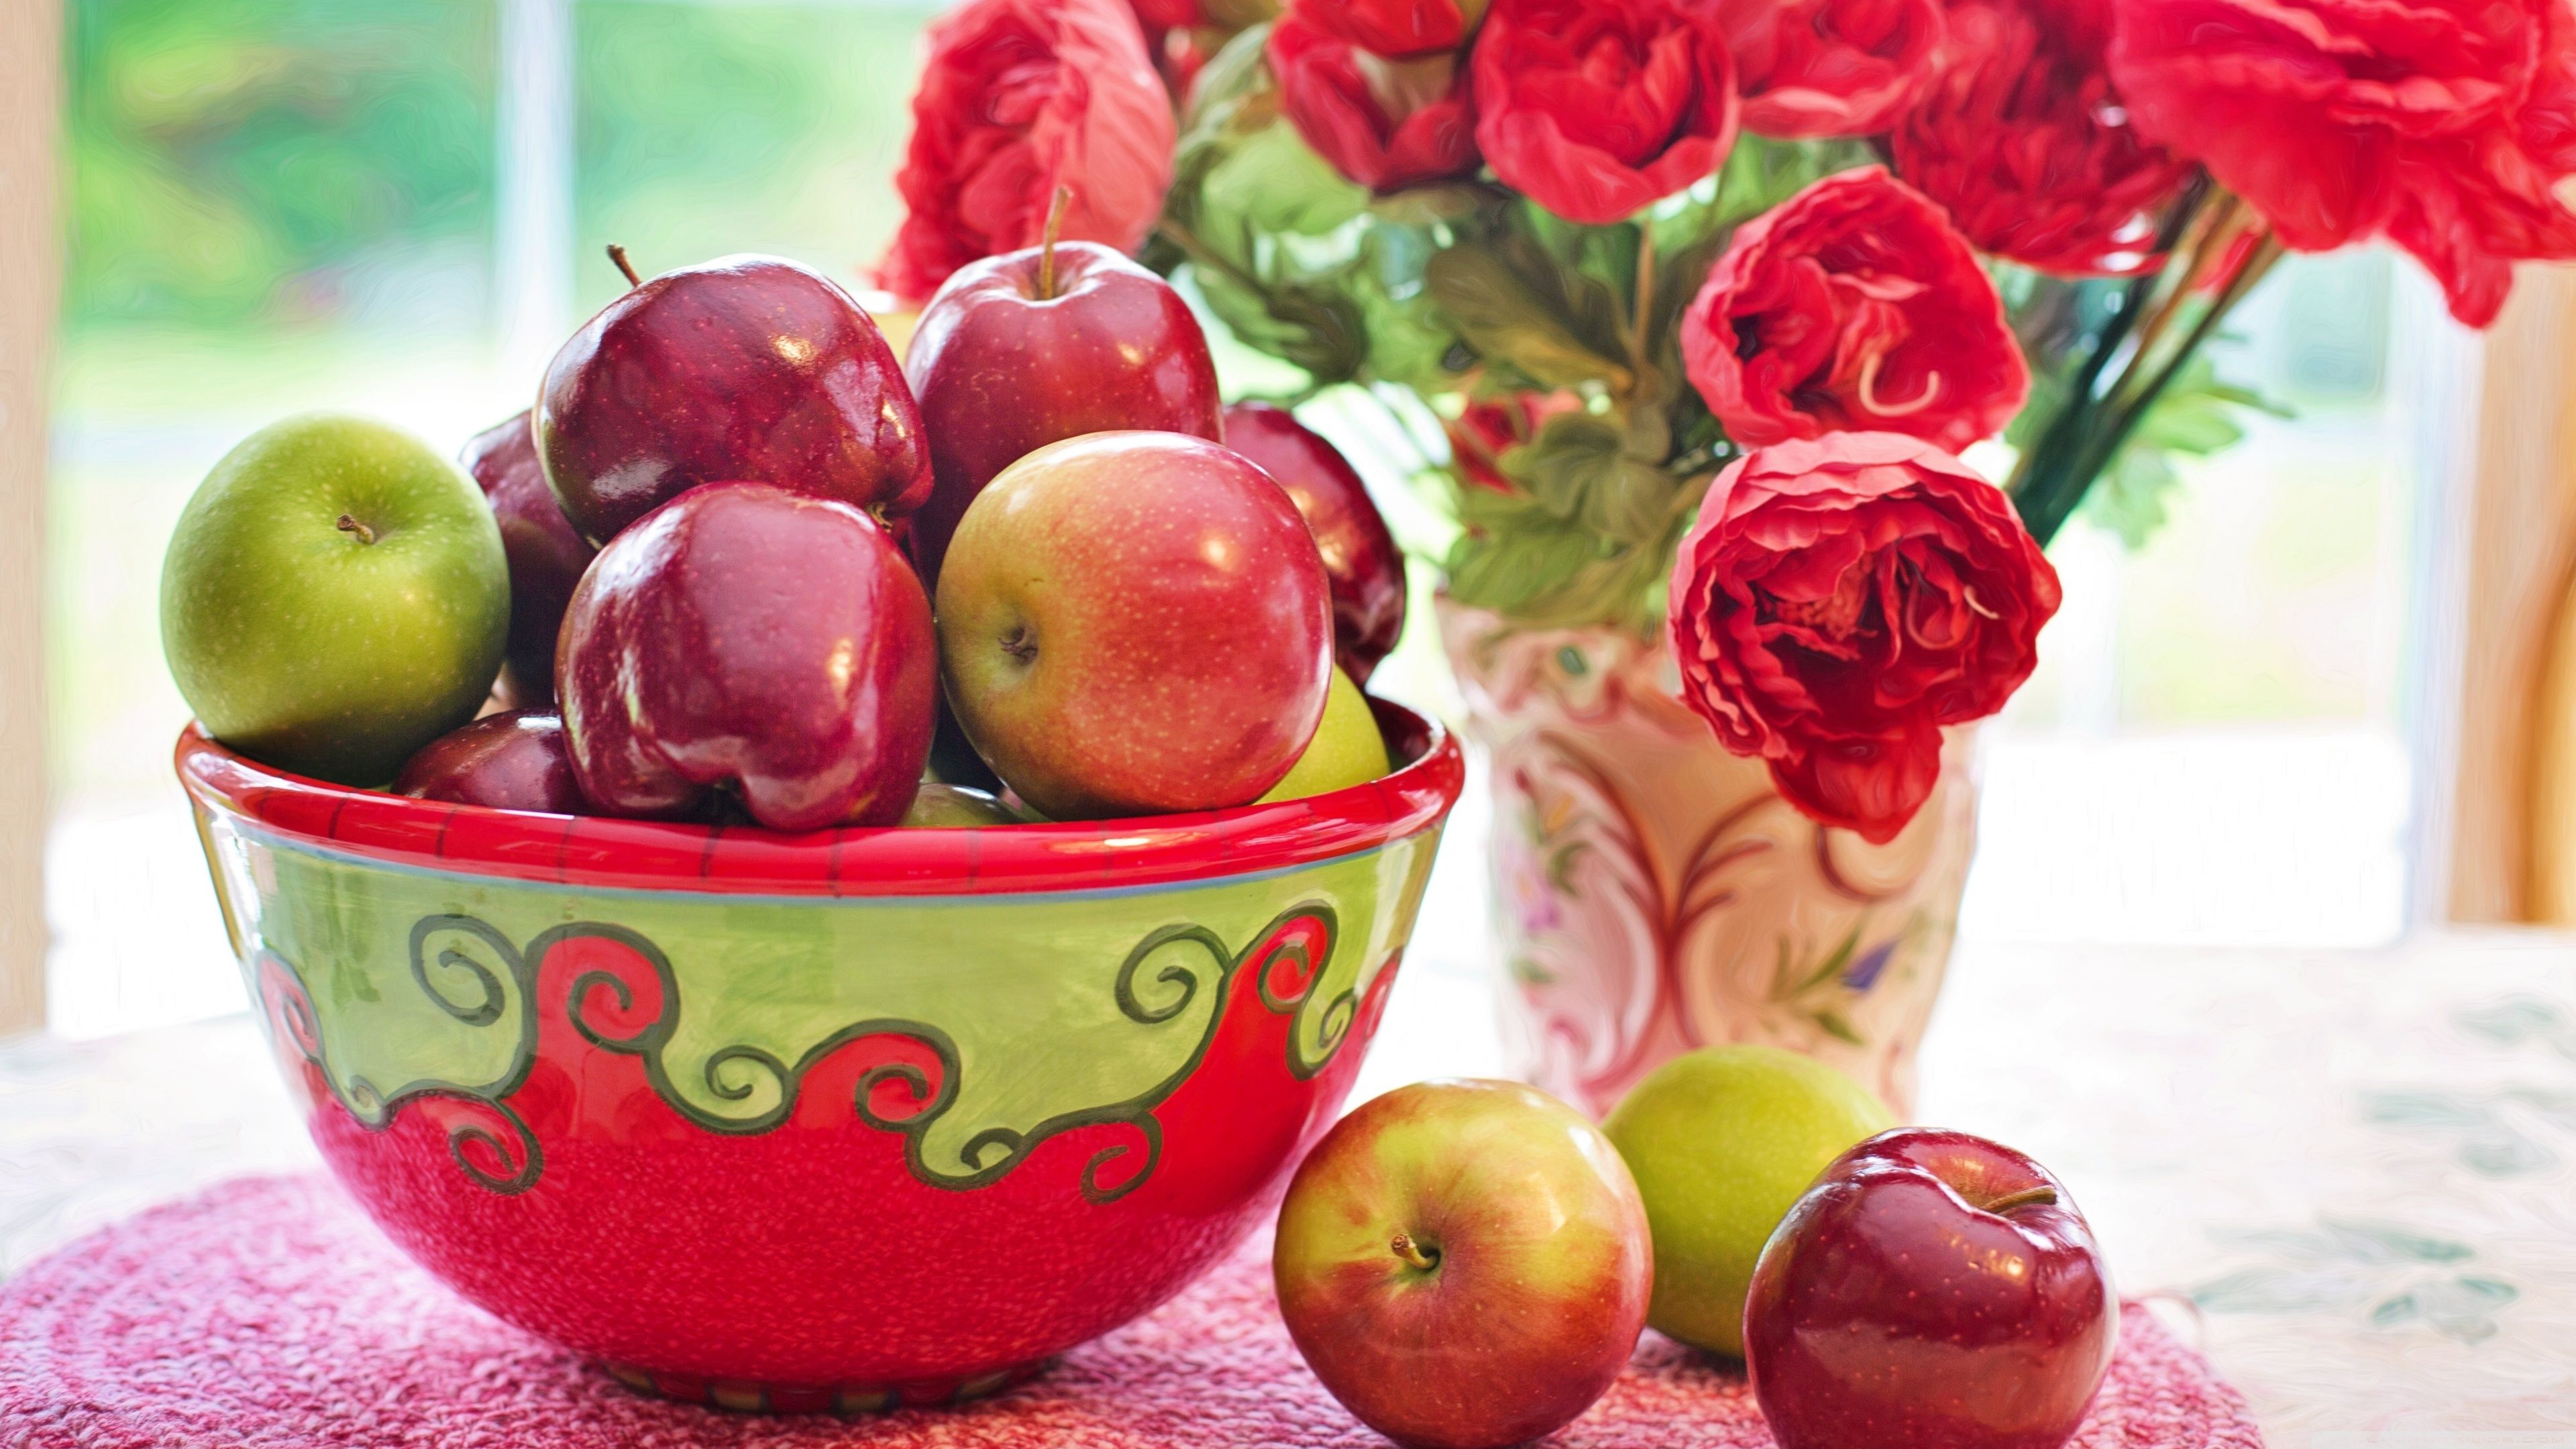 Still Life Apples fruits Bowl, Red Flowers in Vase Ultra HD